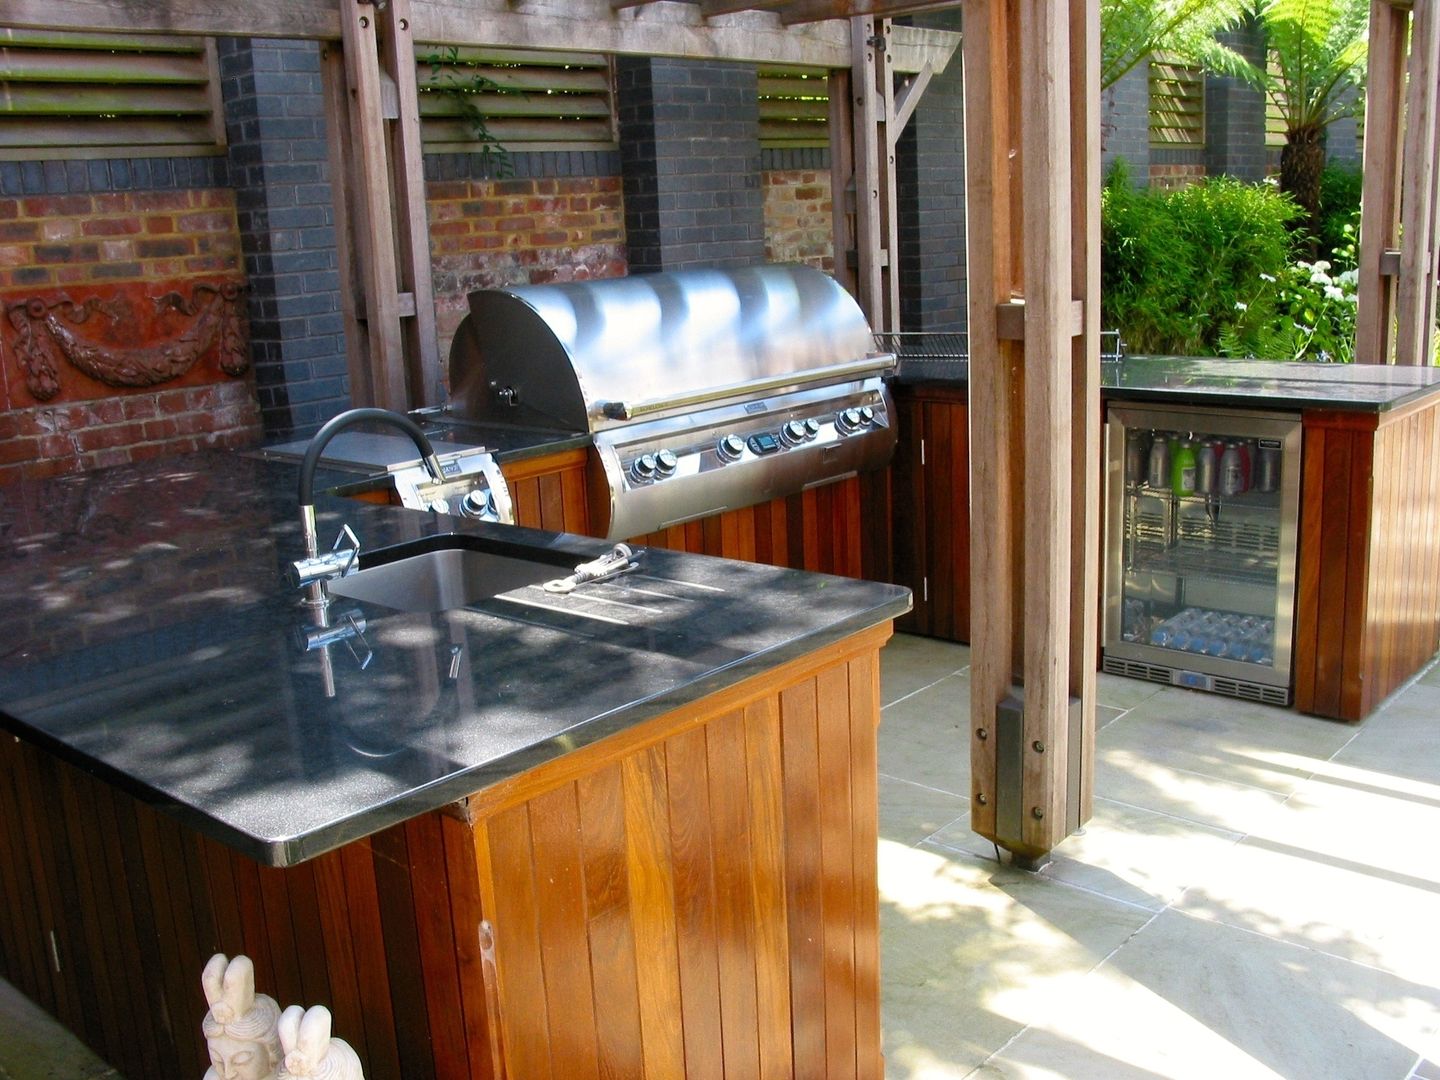 view of sink, BBQ and fridge wood-fired oven حديقة